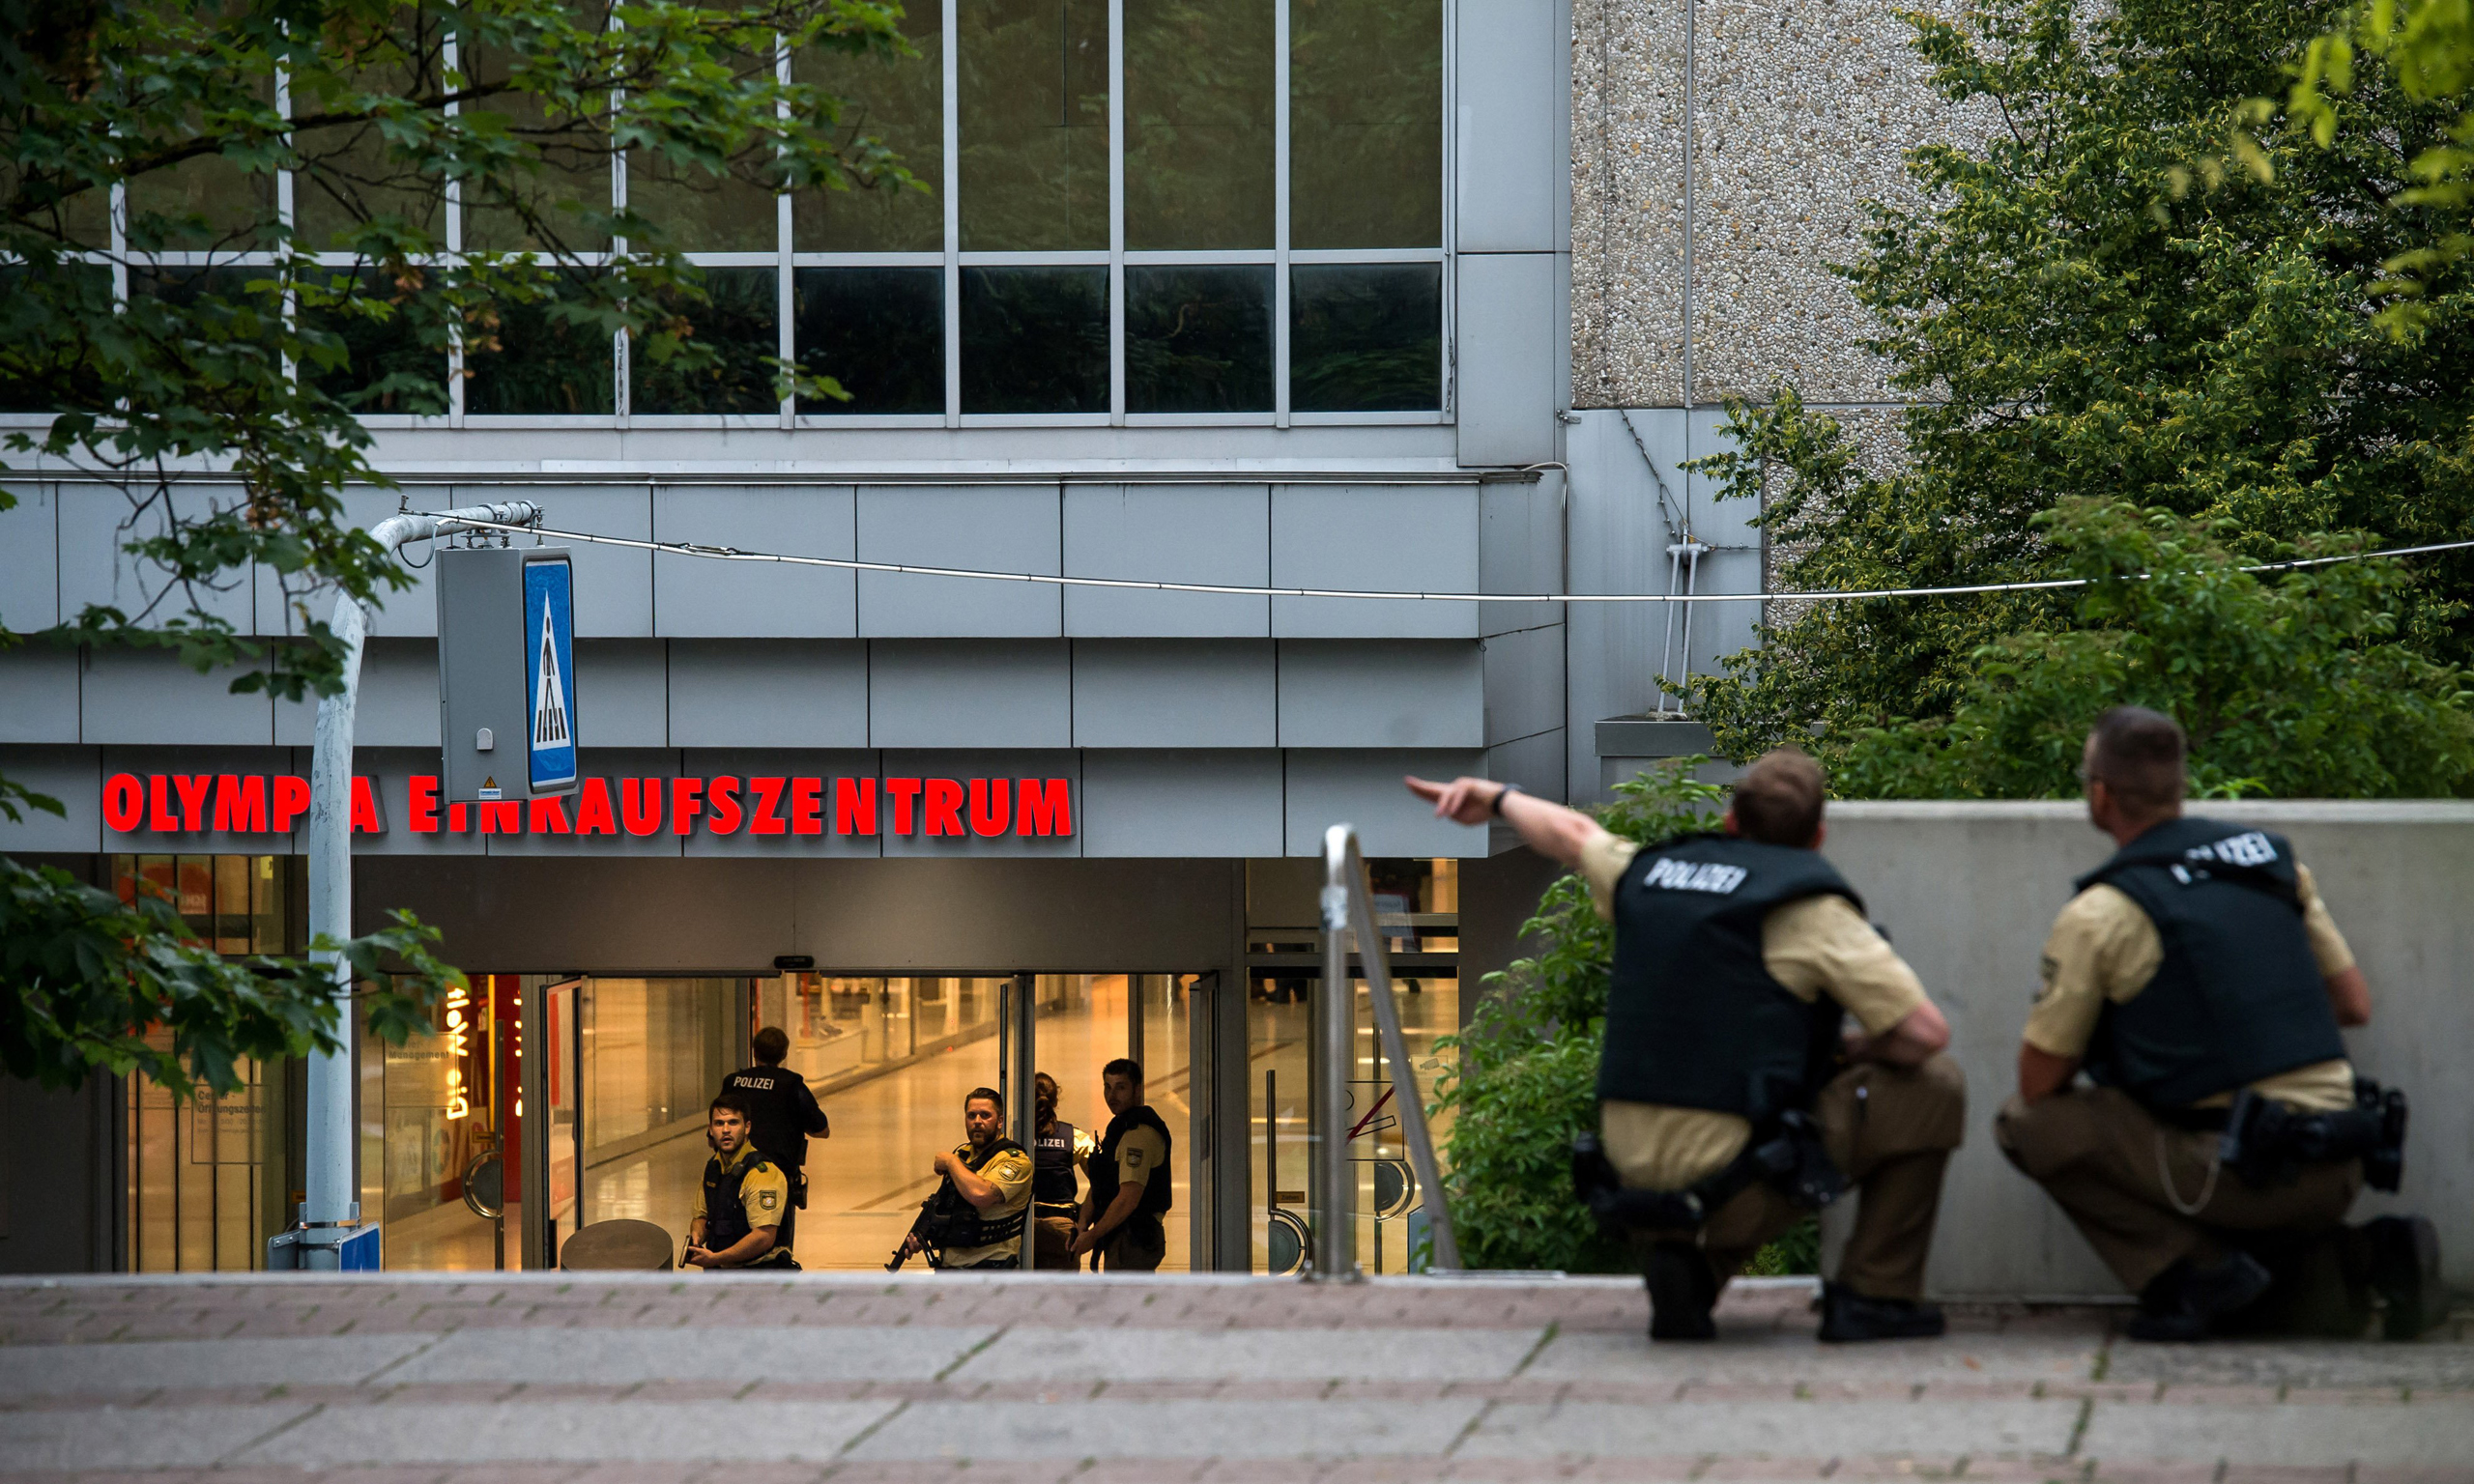 Police officers respond to a shooting at the Olympia Einkaufzentrum (OEZ) in Munich, Germany on July 22, 2016. (Joerg Koch—Getty Images)